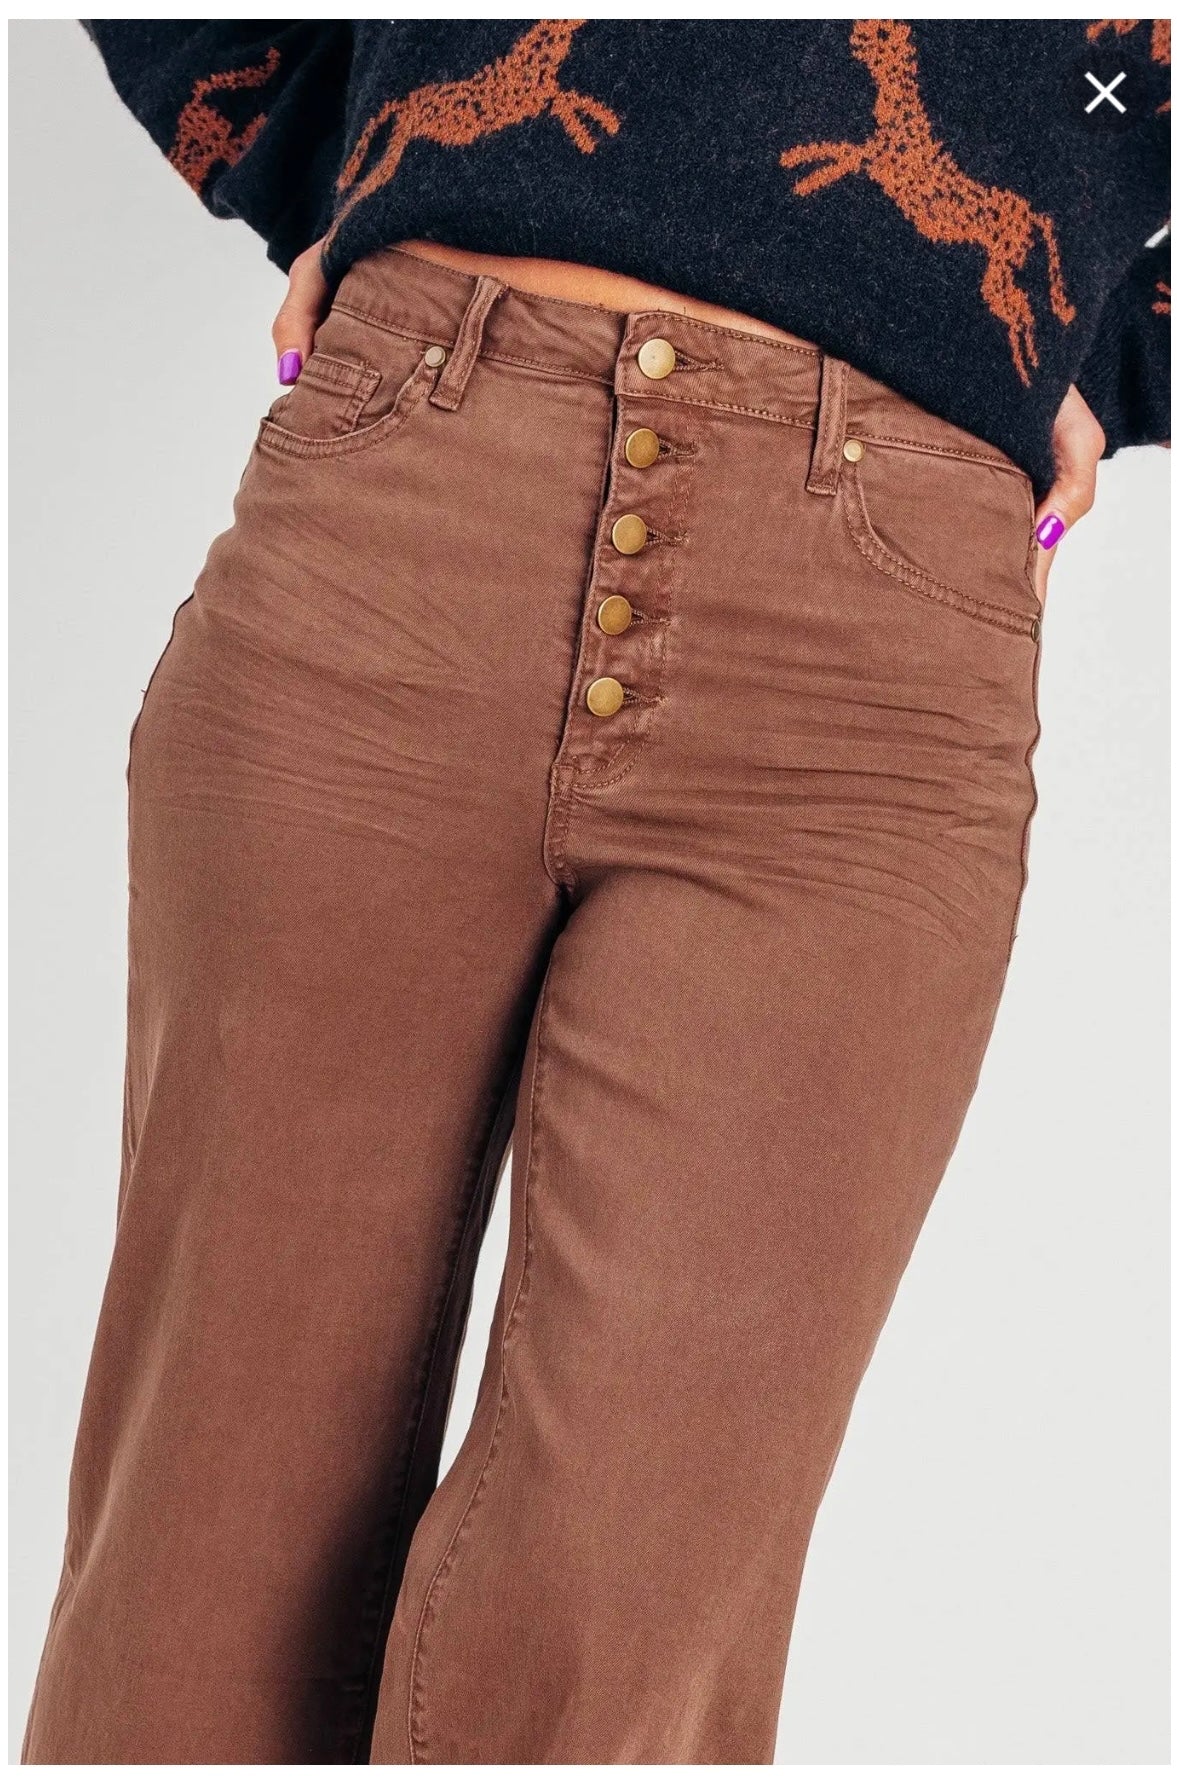 Coffee Brown Wide Leg Button Front Stretch Pants